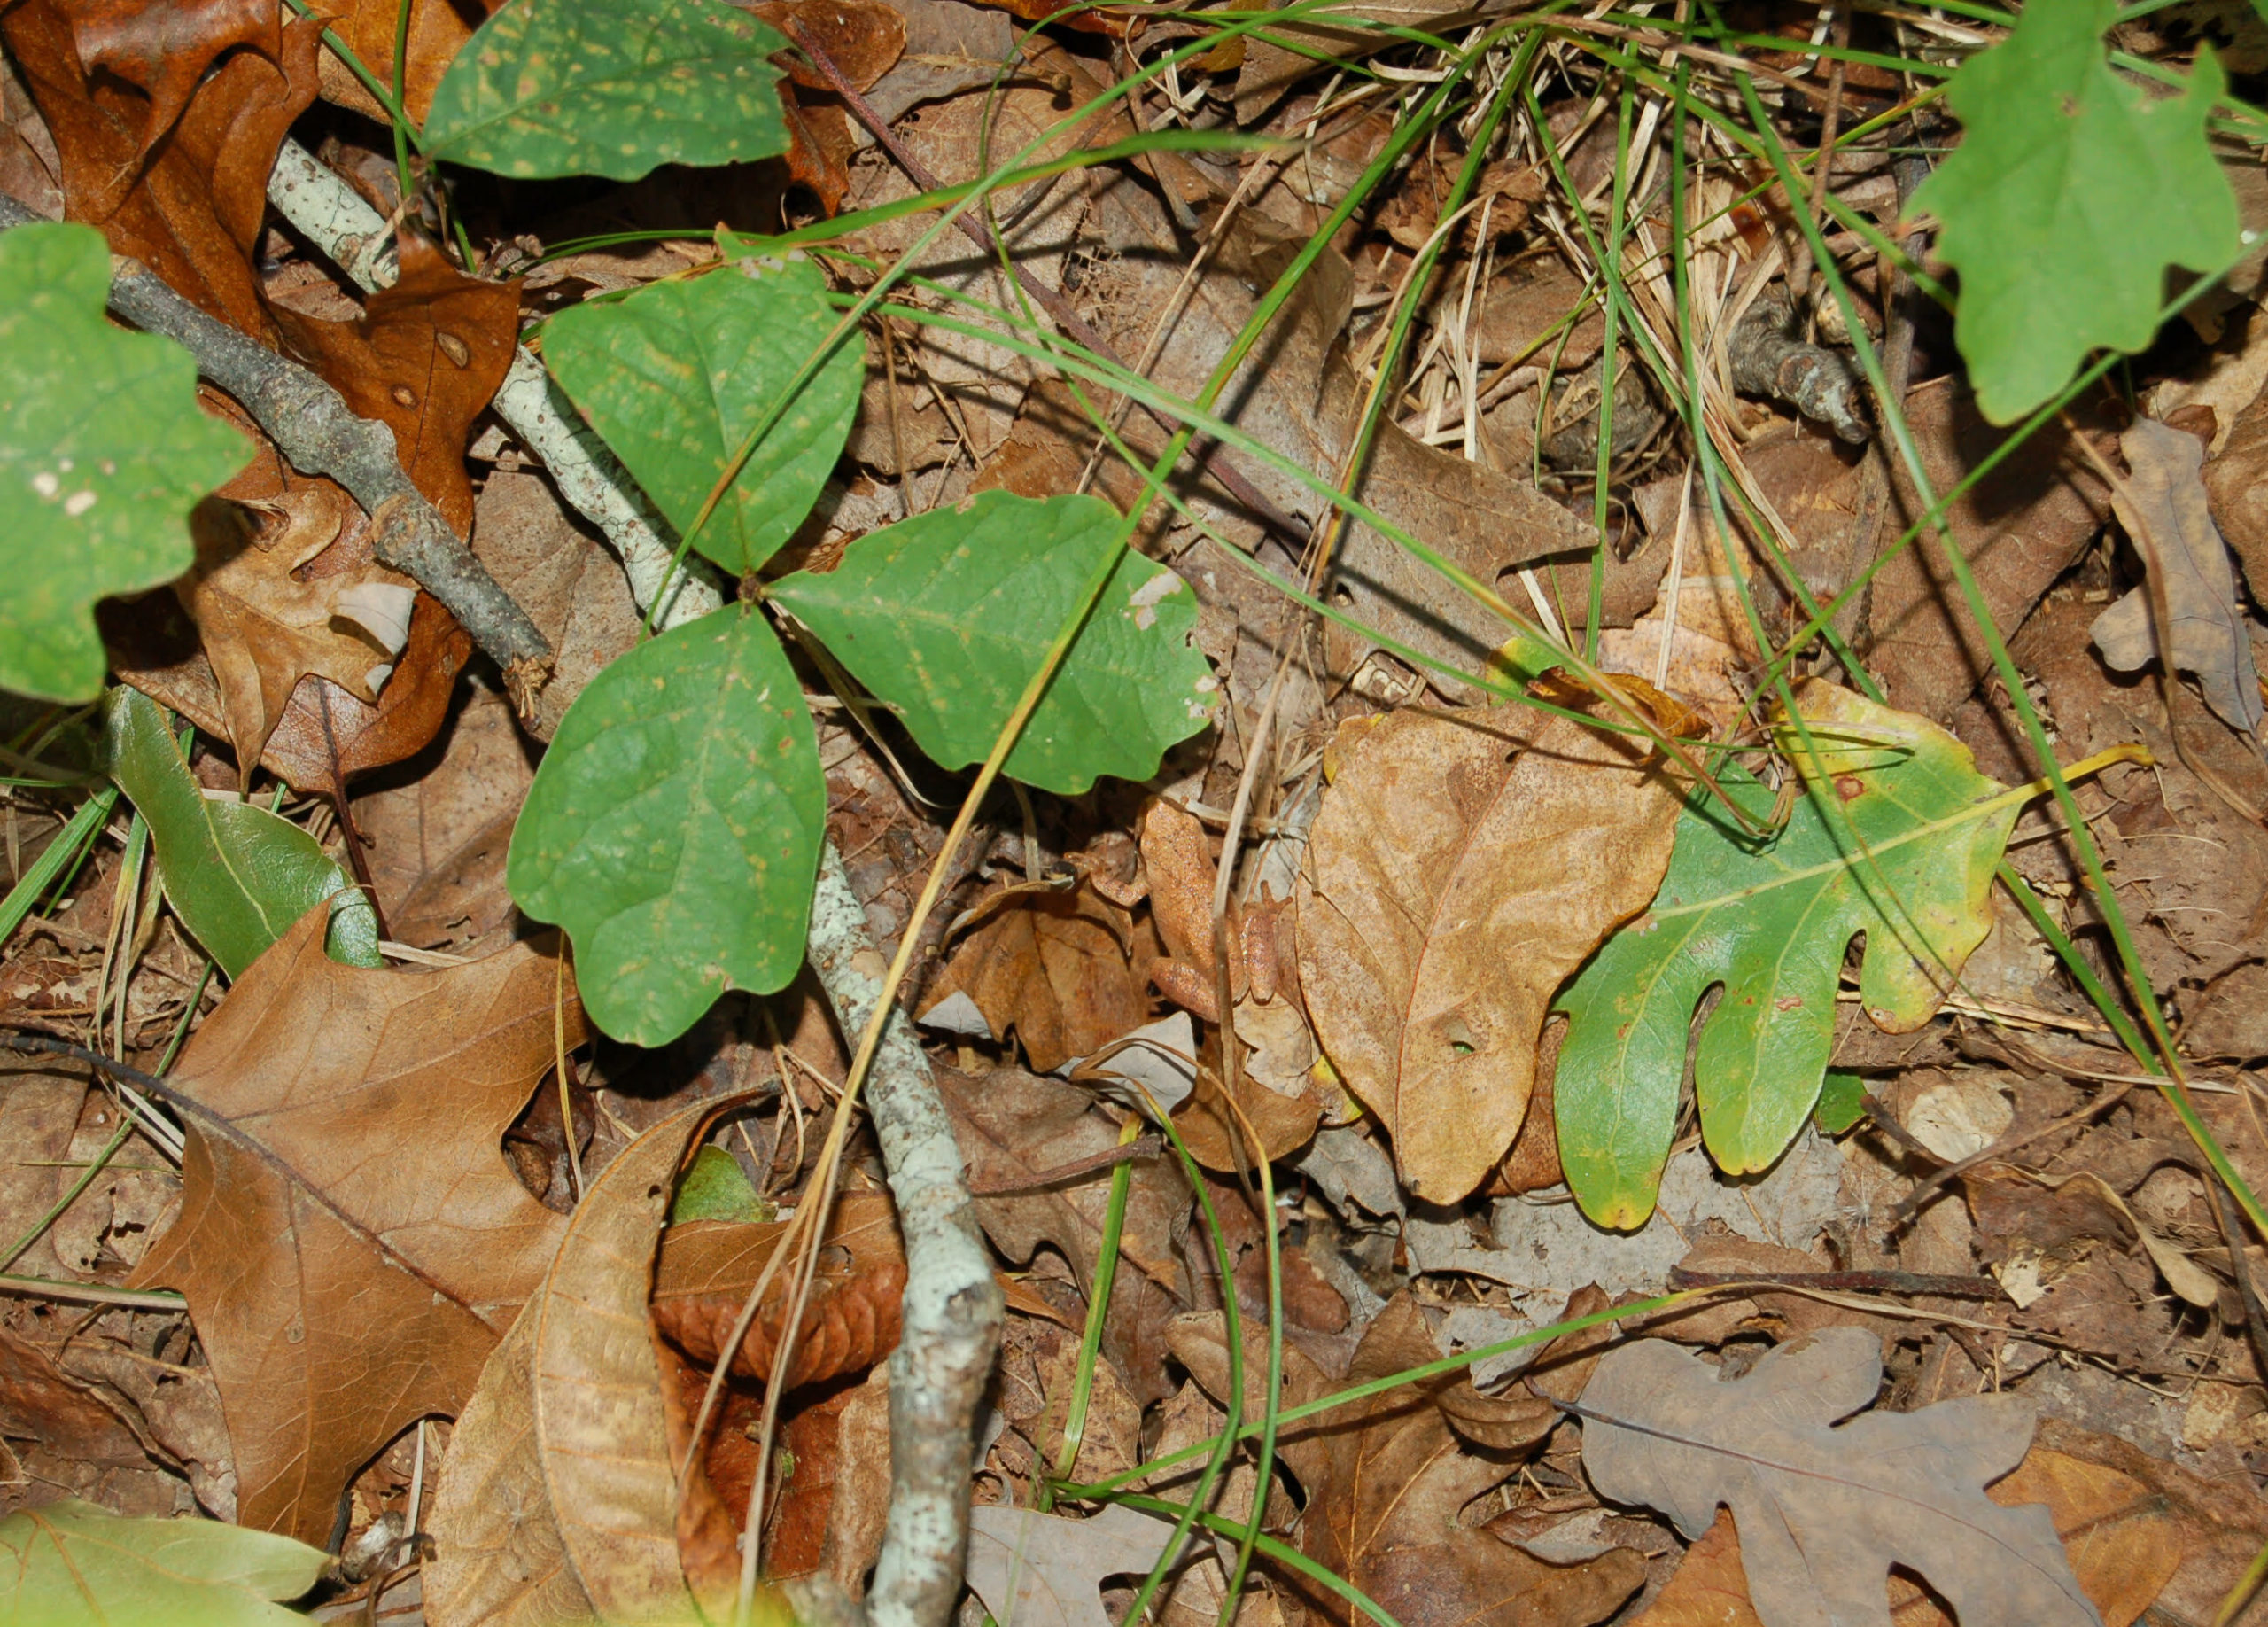 Can you find the spring peeper on the forest floor in this photo?